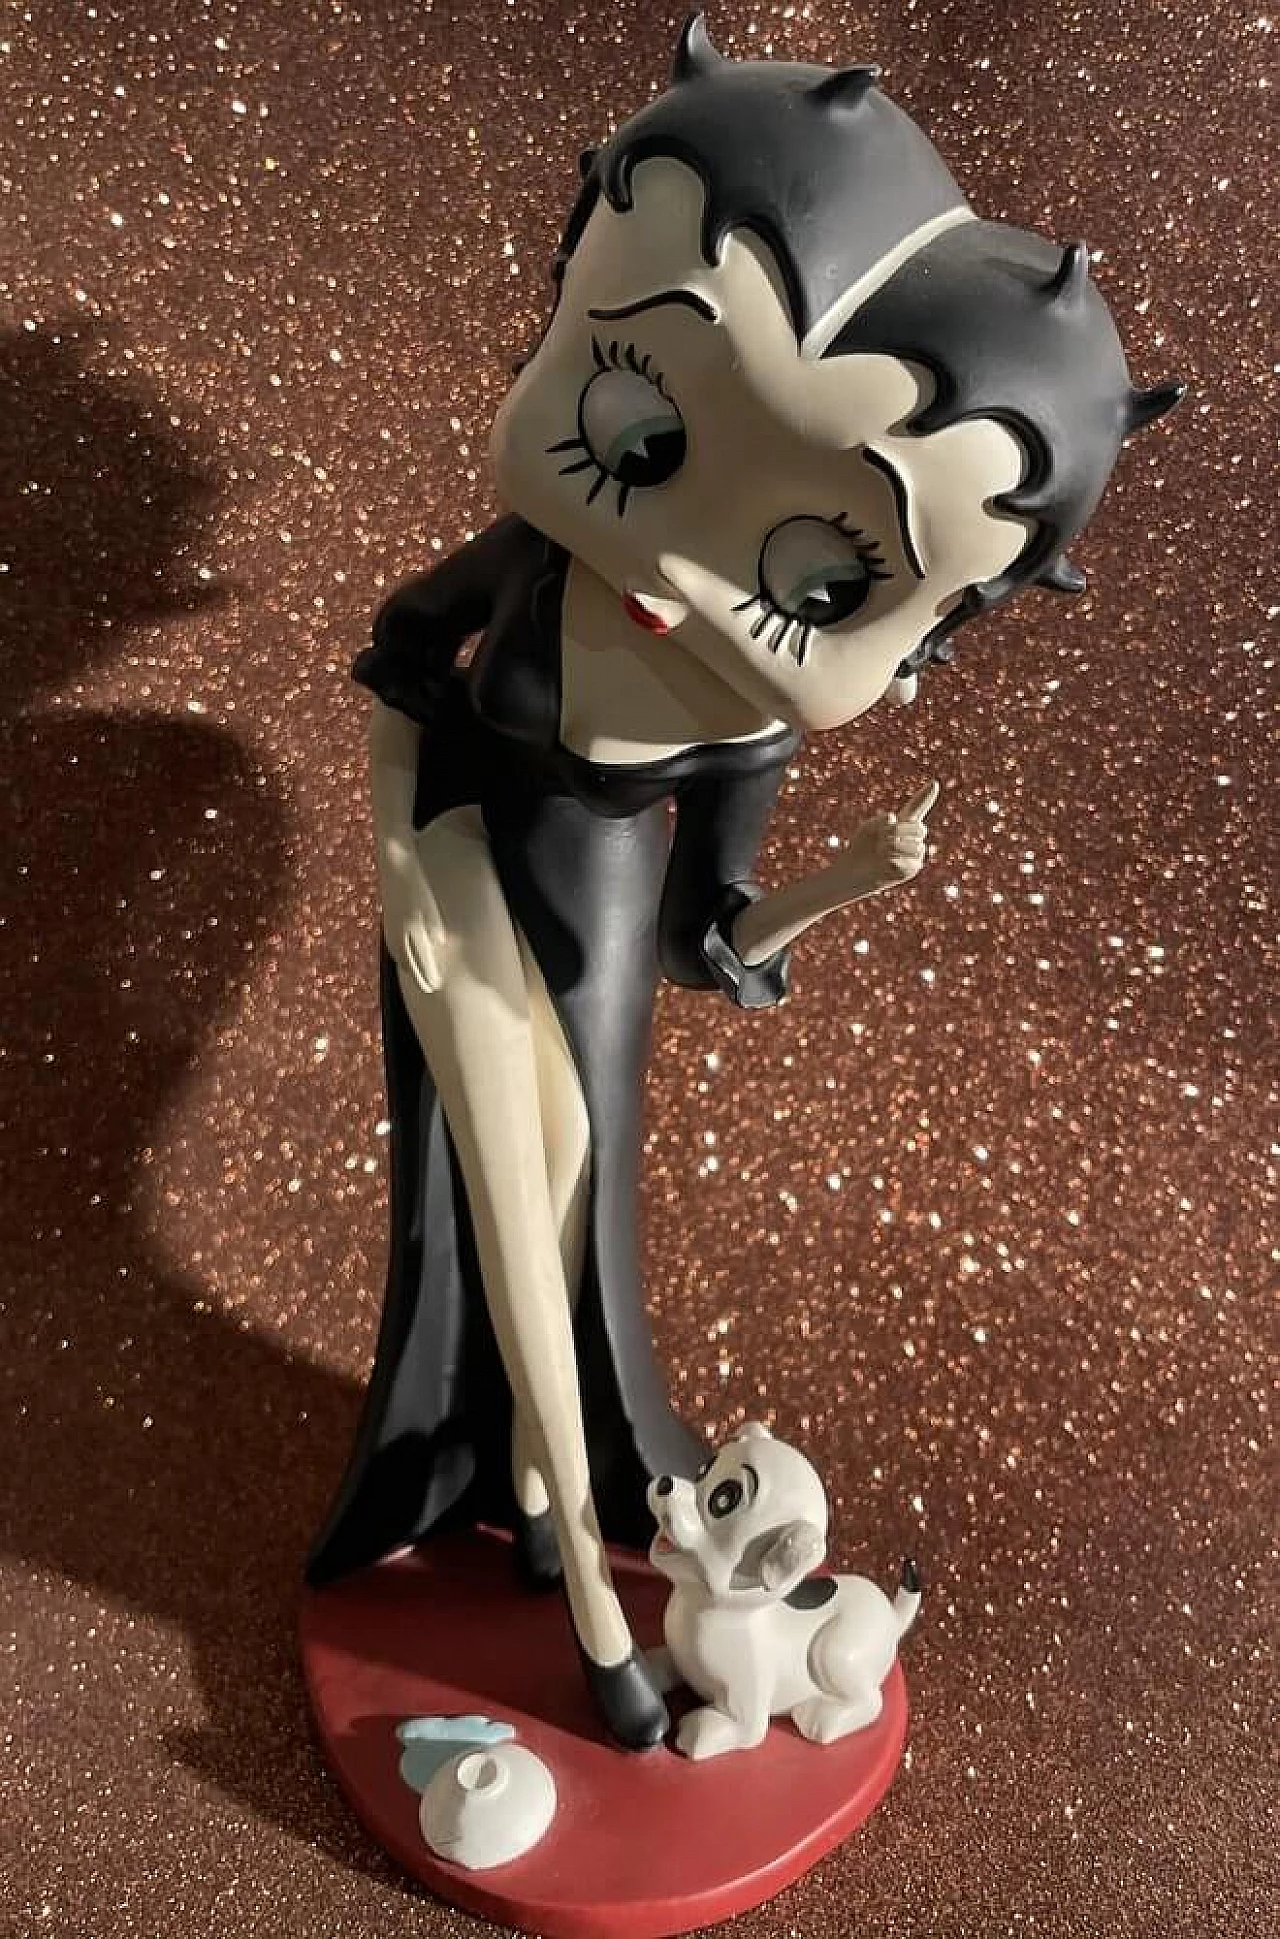 Betty Boop collectible figurine with black dress and small dog by Fleischer Studios, 2007 7